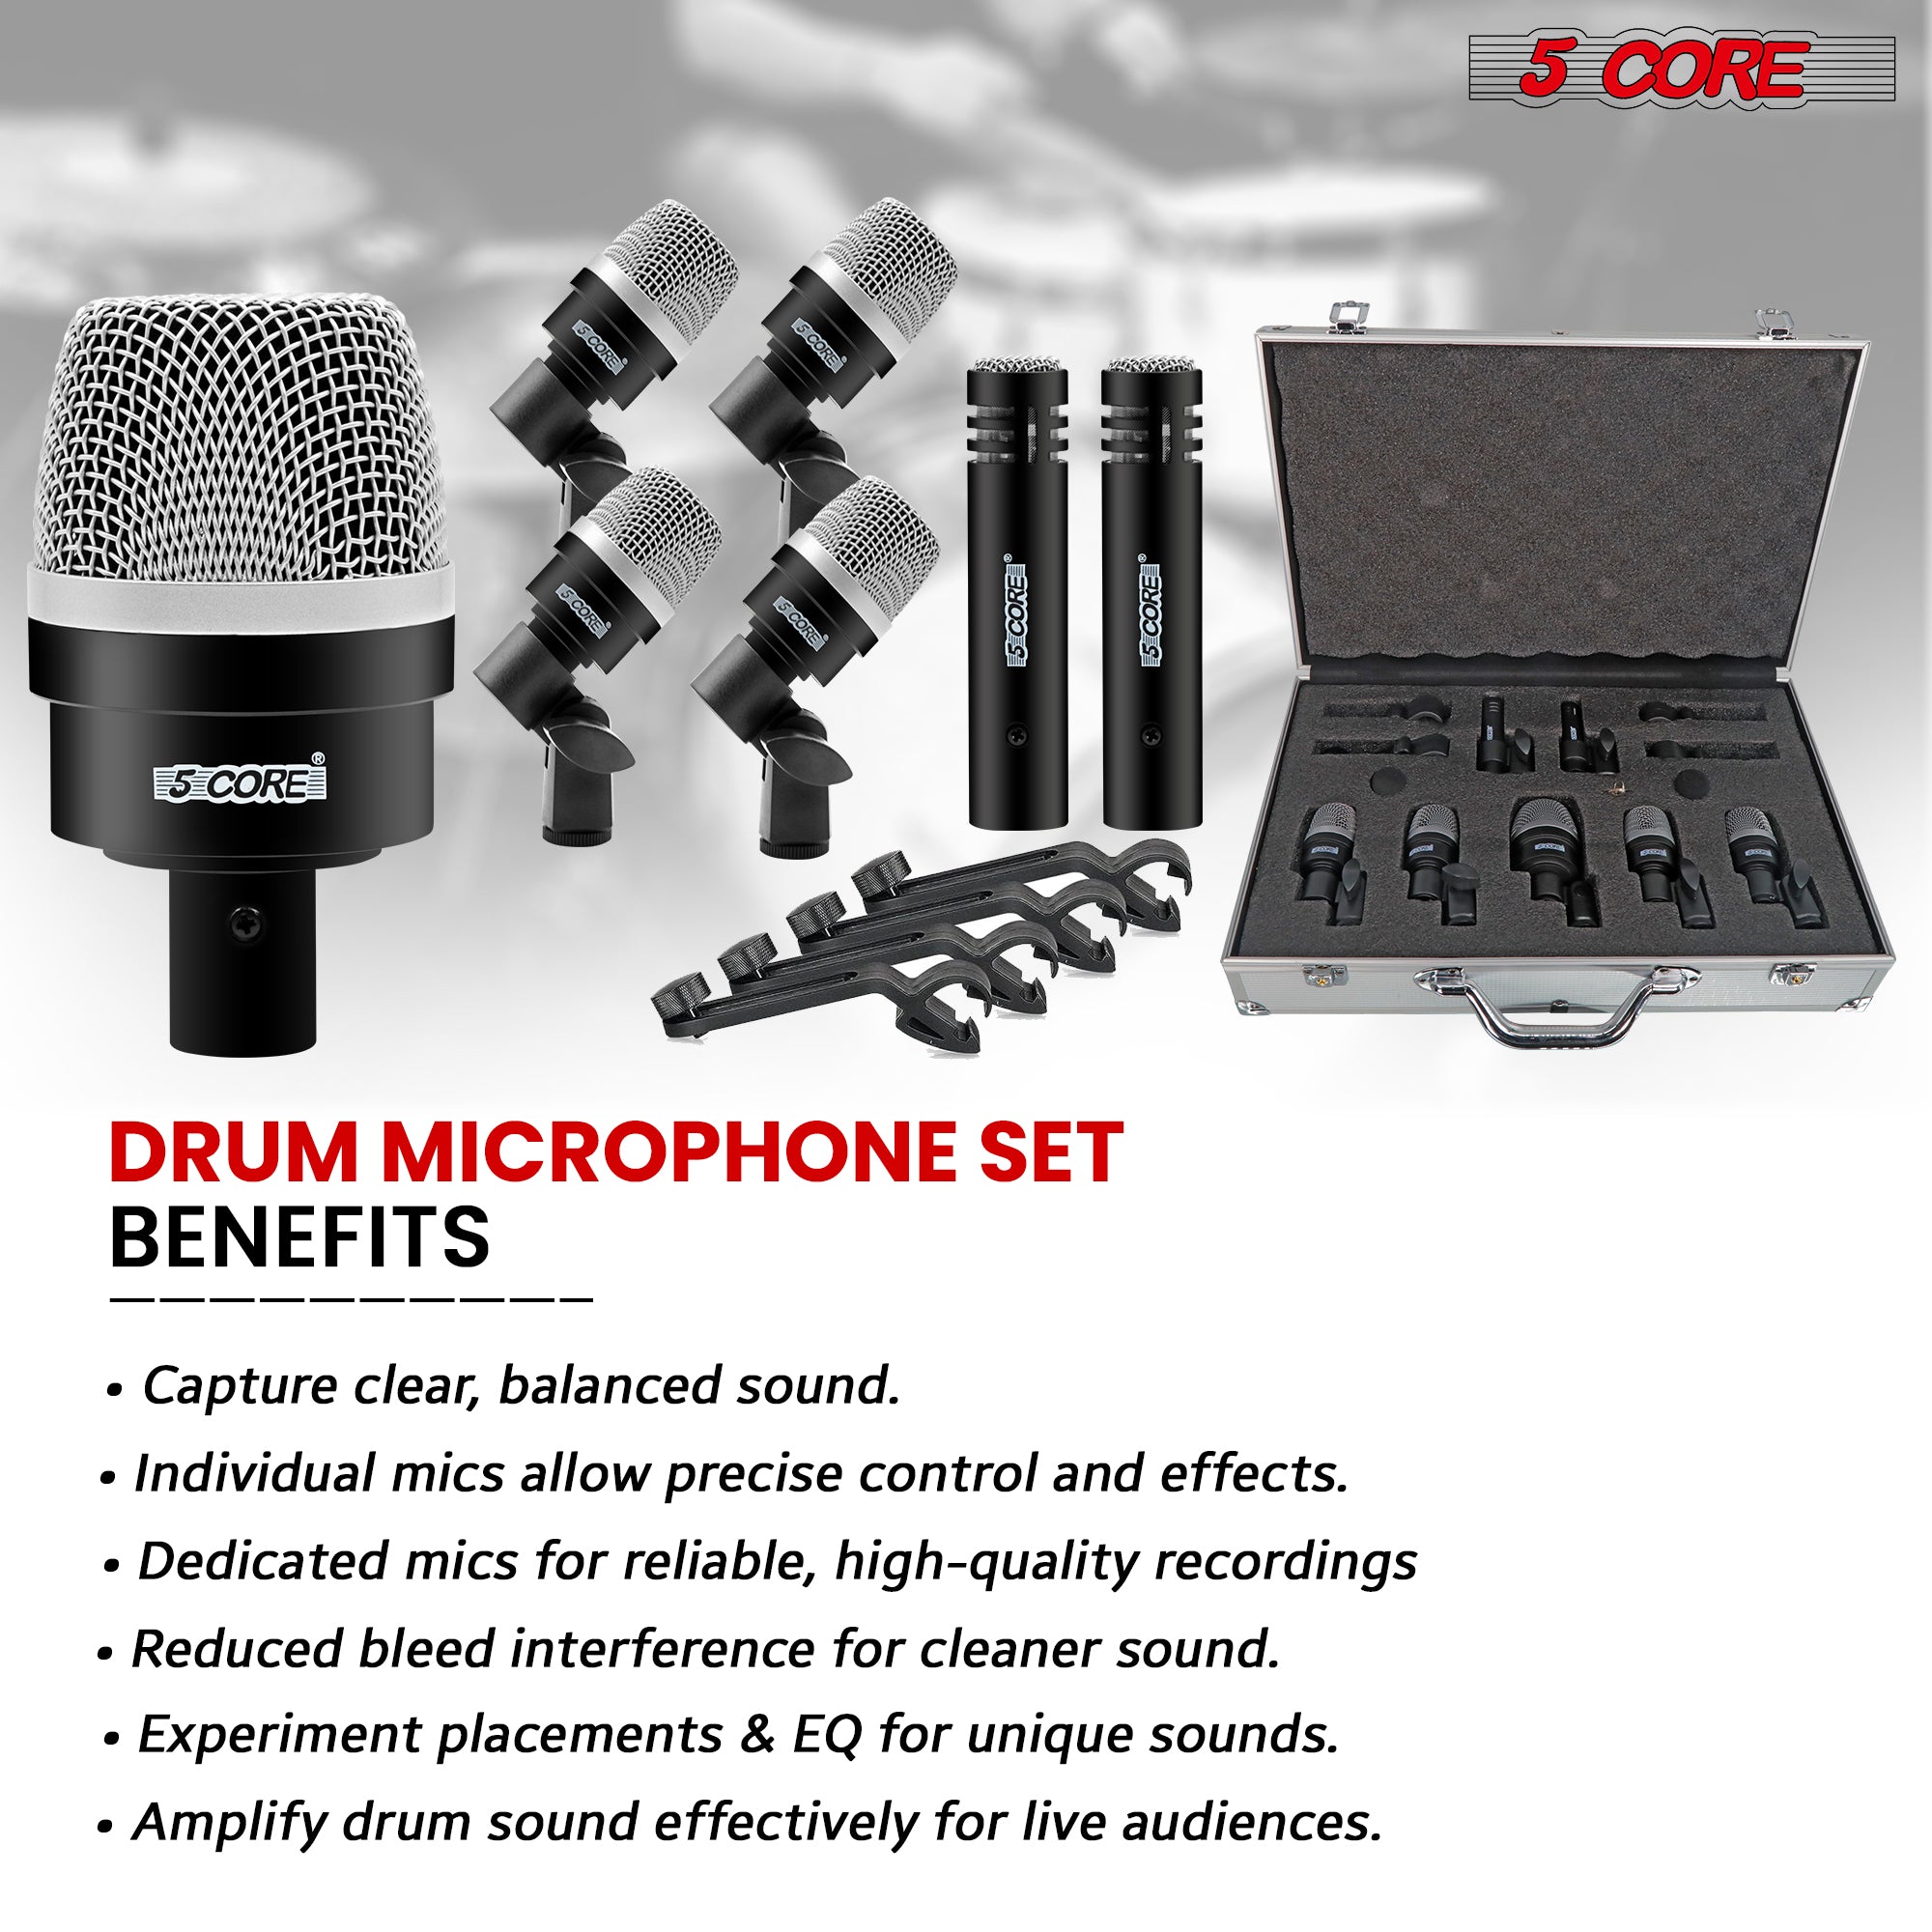 Comprehensive drum microphone kit featuring seven pieces for complete drum coverage.